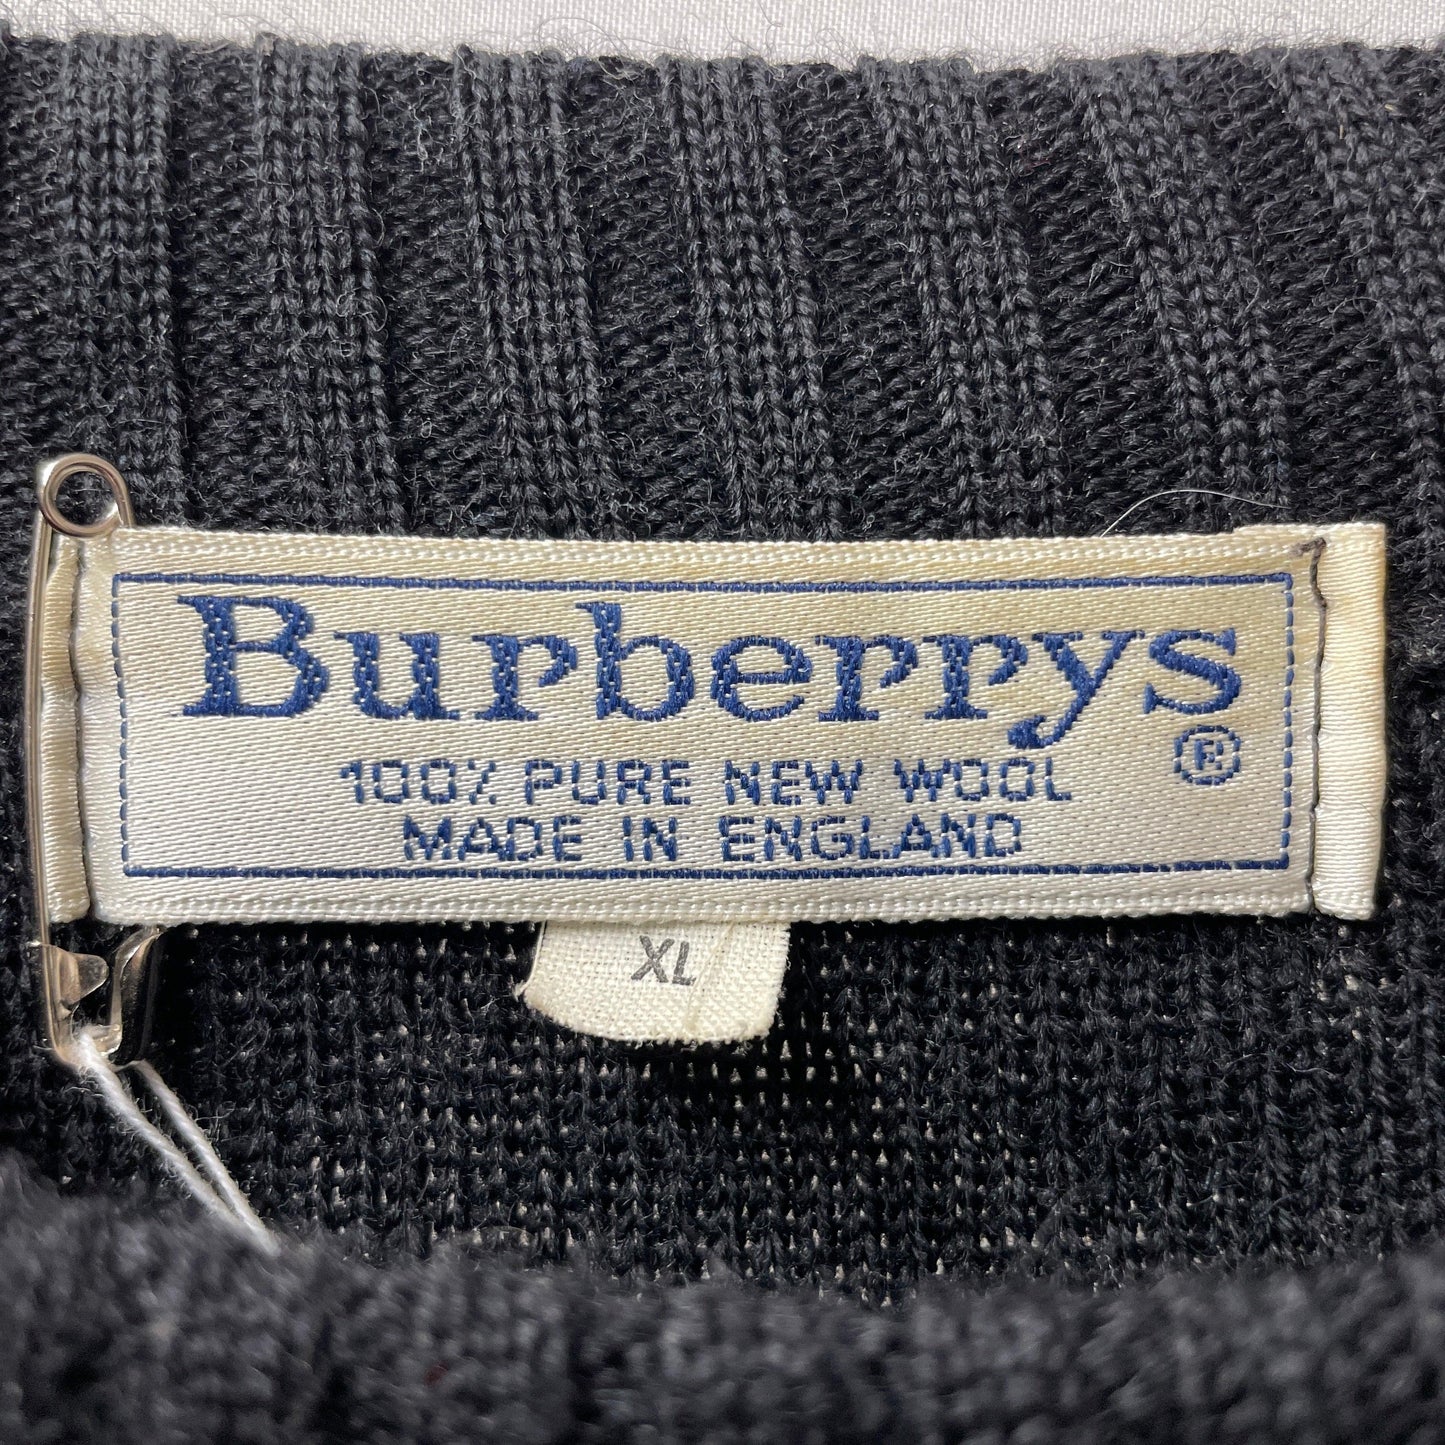 Burberrys knit leather switching Rebeau patch Burberry knit burberry